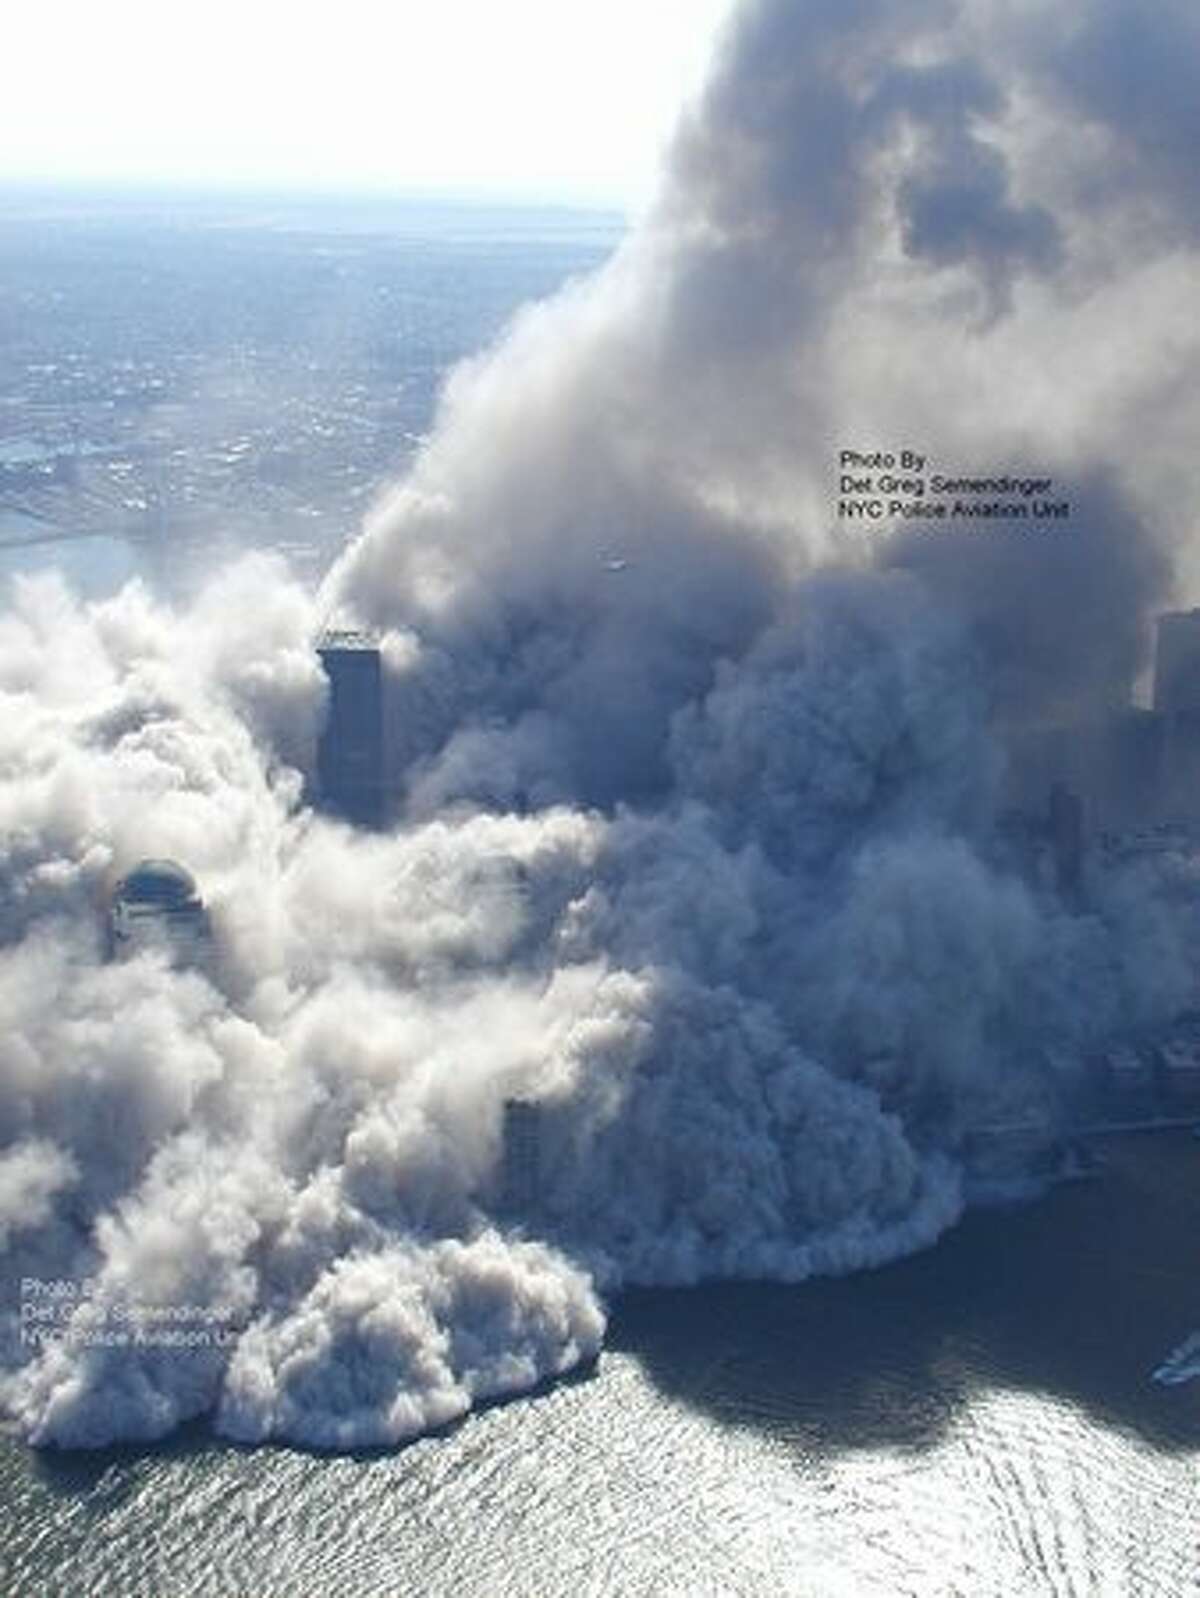 This photo taken Sept. 11, 2001 by the New York City Police Department and obtained by ABC News, which claims to have obtained it under the Freedom of Information Act in 2010, shows smoke and ash rising in the area around the World Trade Center in New York. (AP Photo/NYPD via ABC News, Det. Greg Semendinger)